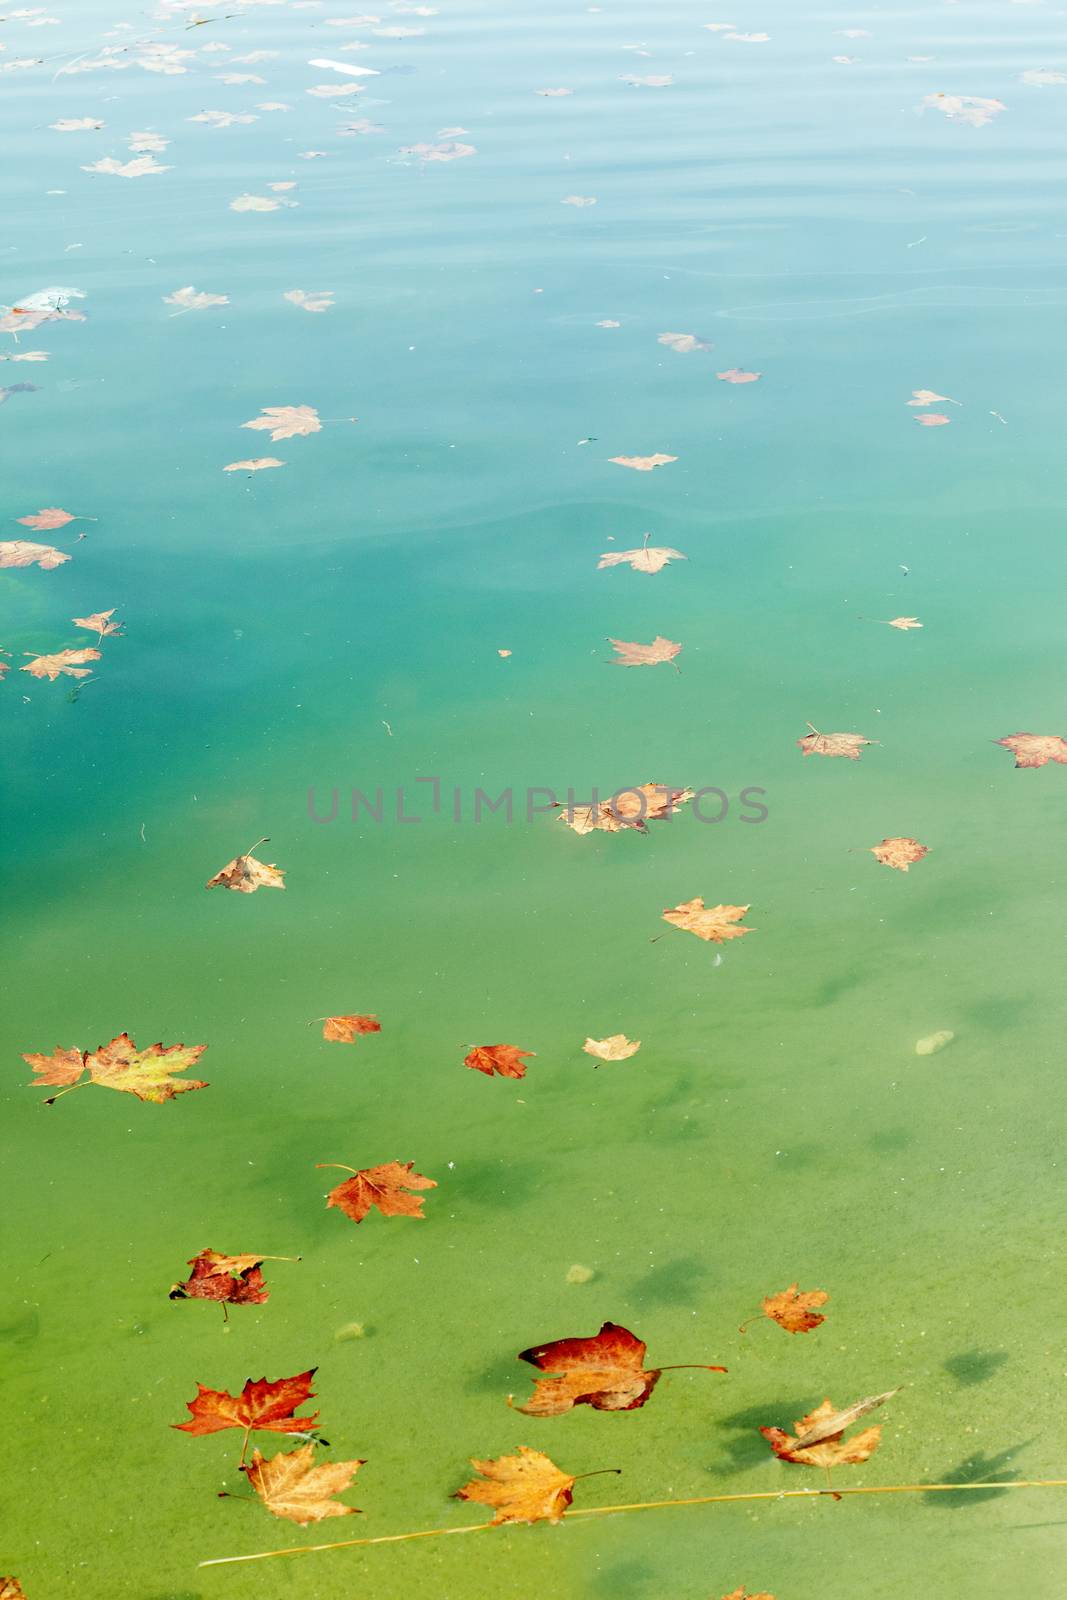 Abstract autumn image. Leaves in the water